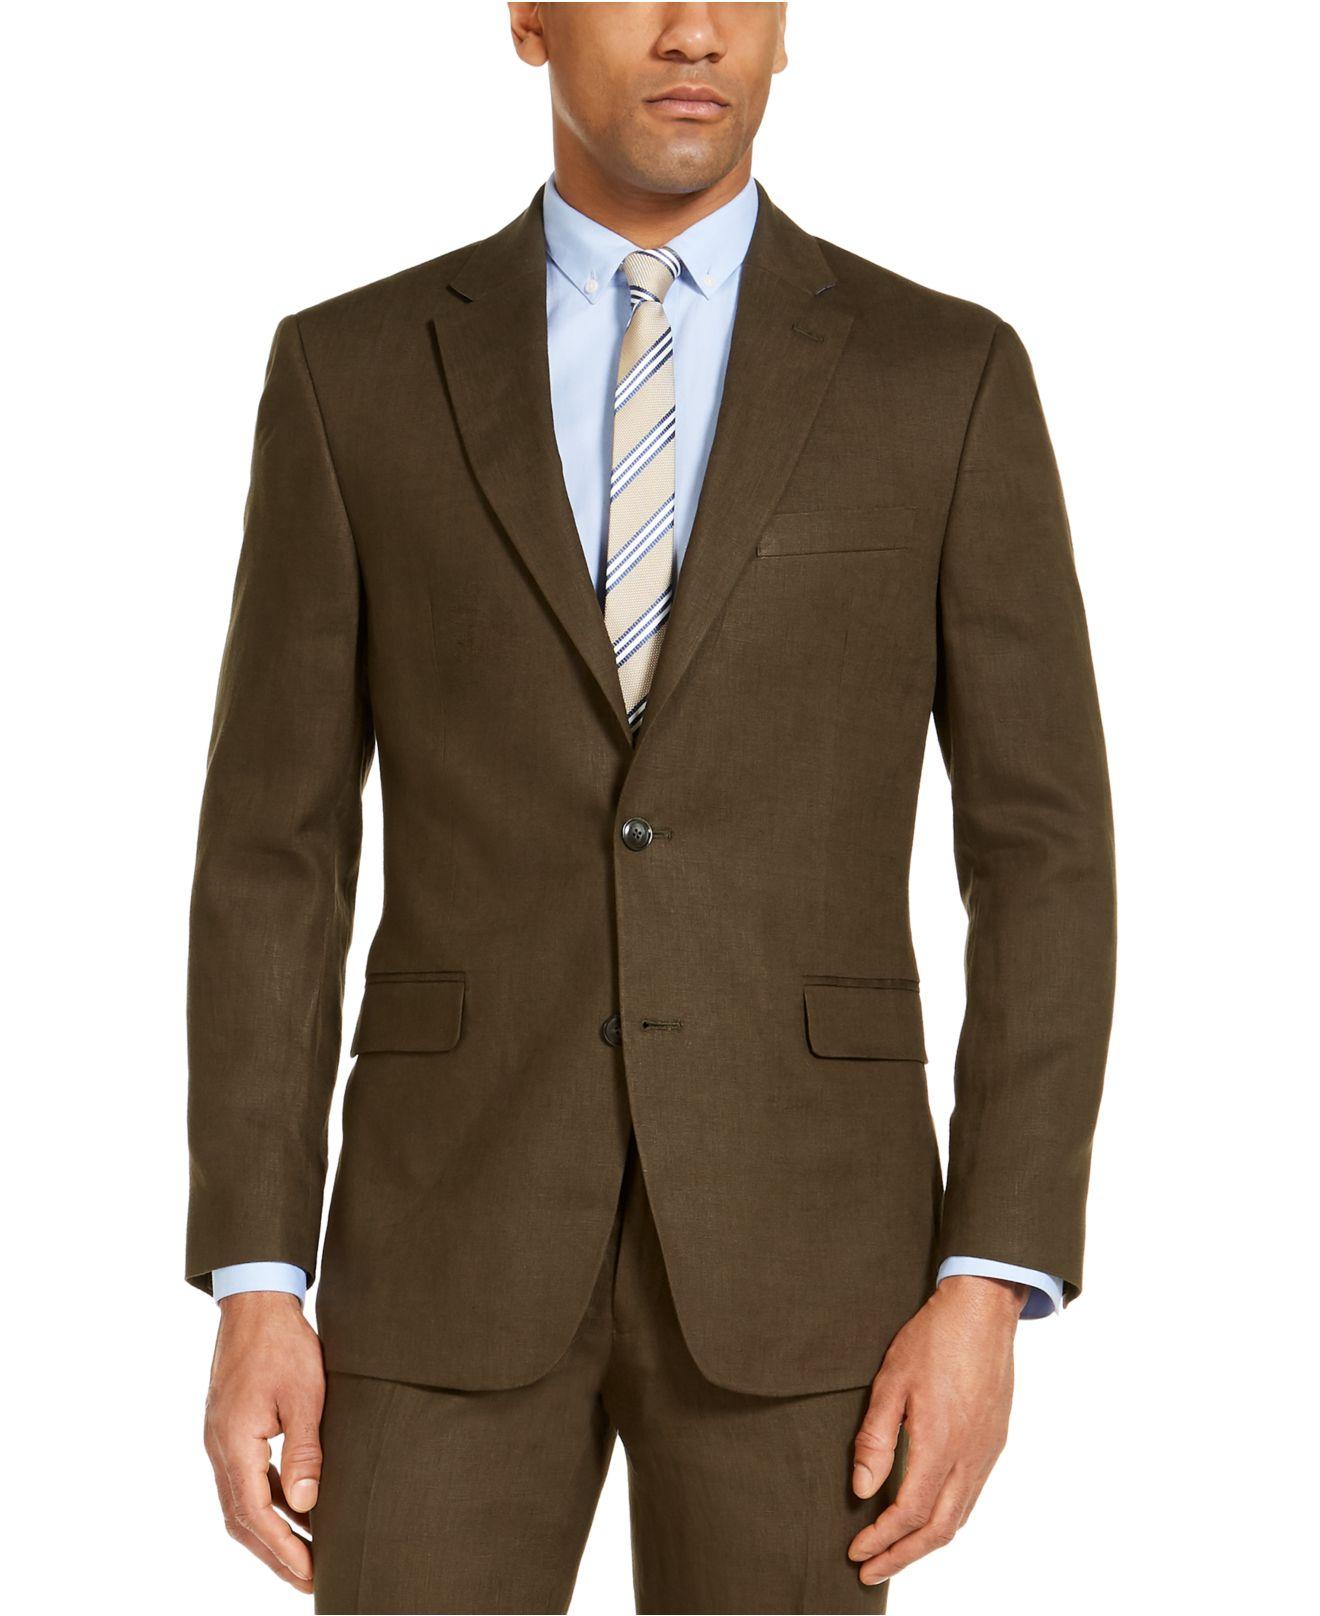 Tommy Hilfiger Mens Jacket Modern Fit Suit Separates with Stretch-Custom Jacket & Pant Size Selection